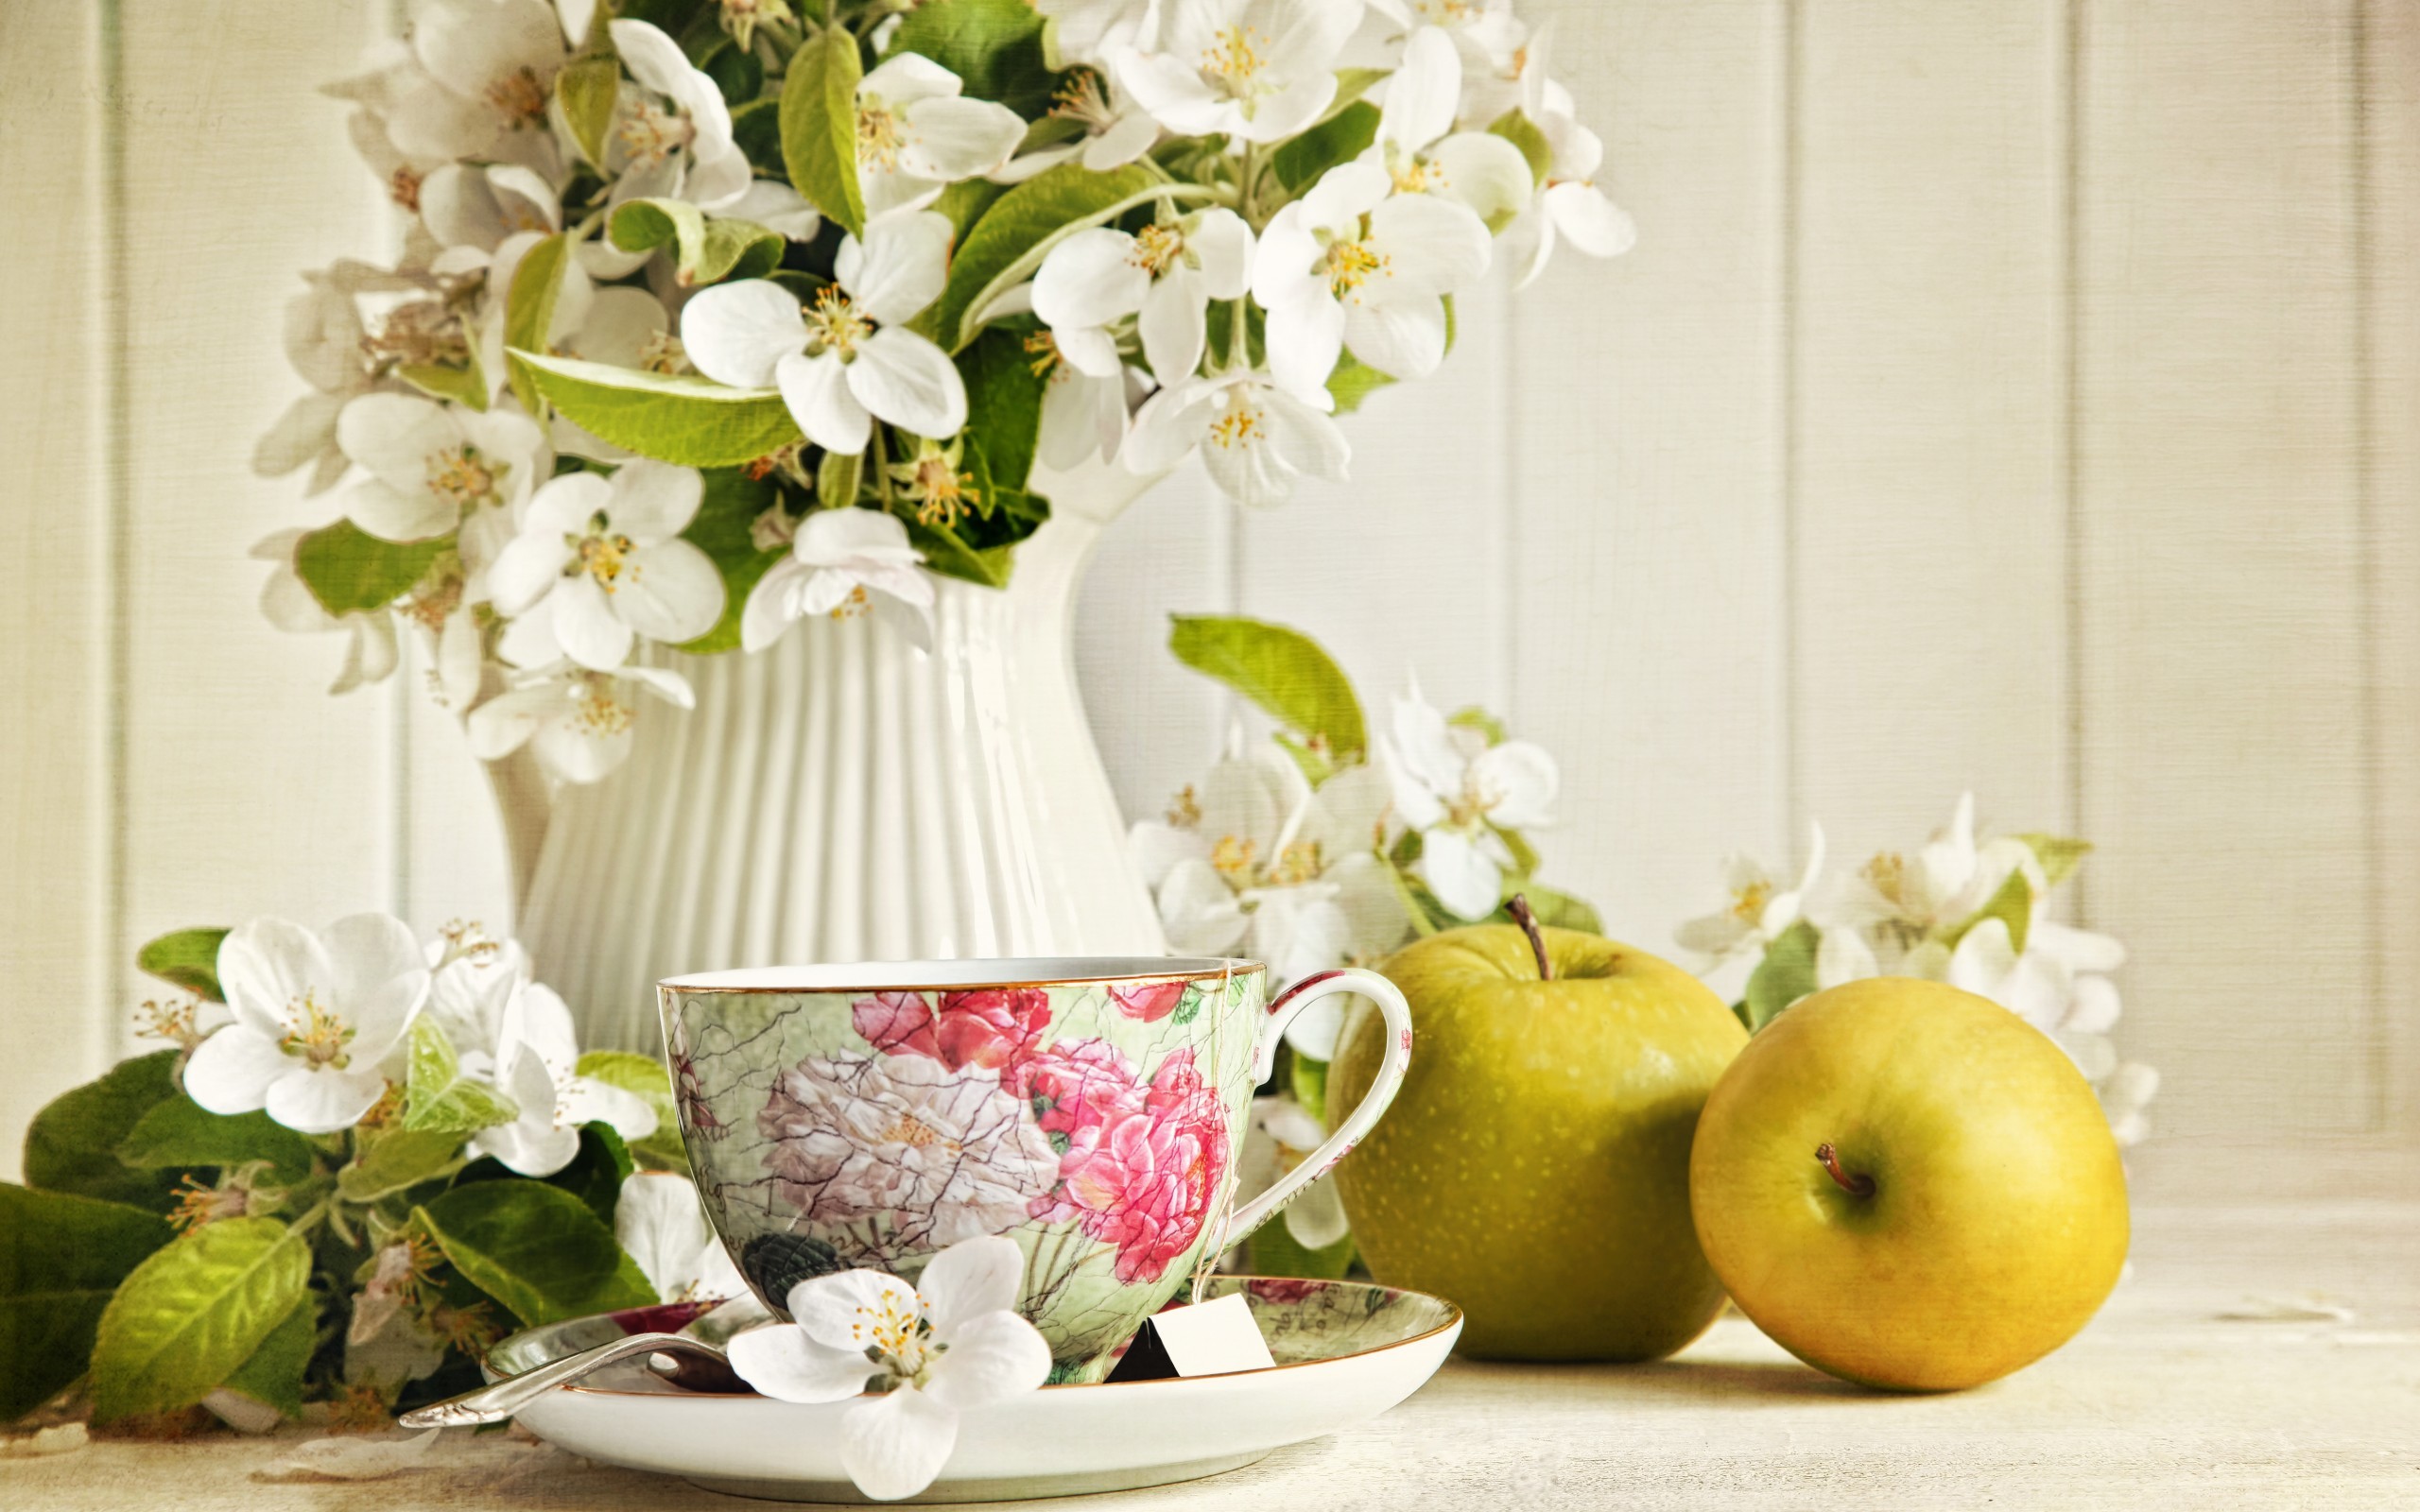 bouquets, plants, flowers, apples, cups, still life, yellow